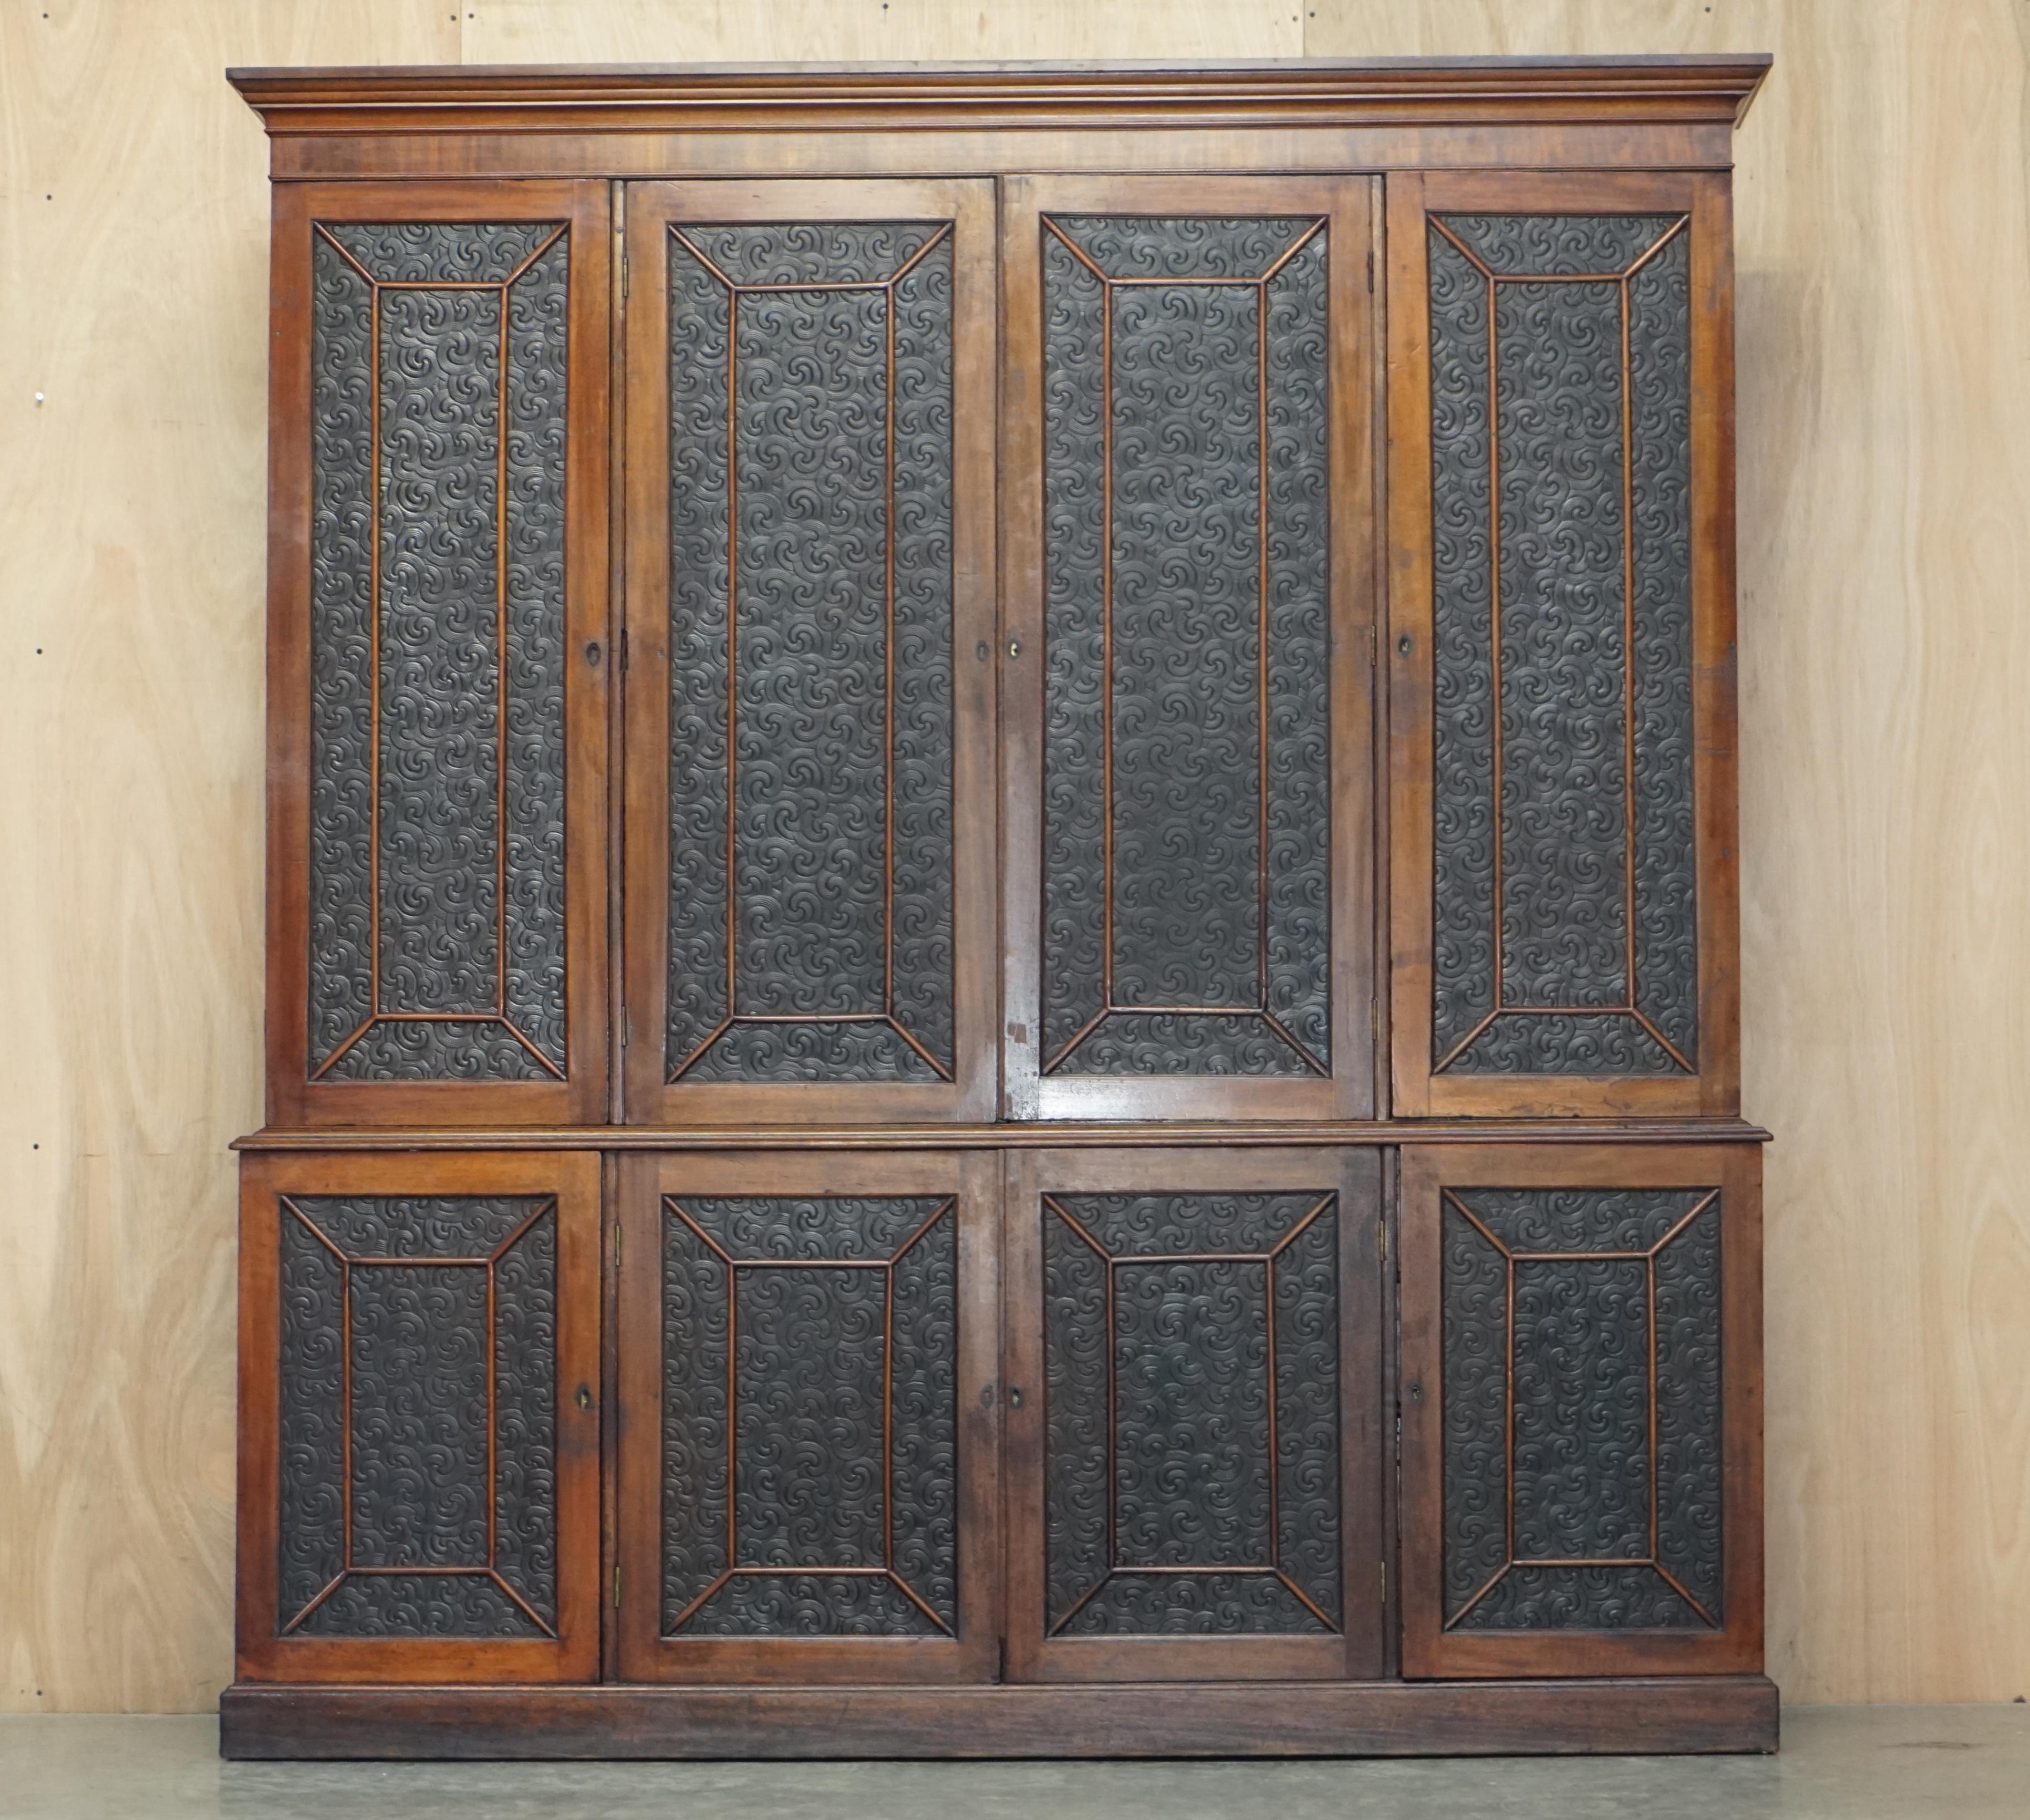 We are delighted to offer for sale this very rare and highly collectable, large mahogany framed with leather embossed panels library bookcase cupboard with build in drawers

Please note the delivery fee listed is just a guide, it covers within the